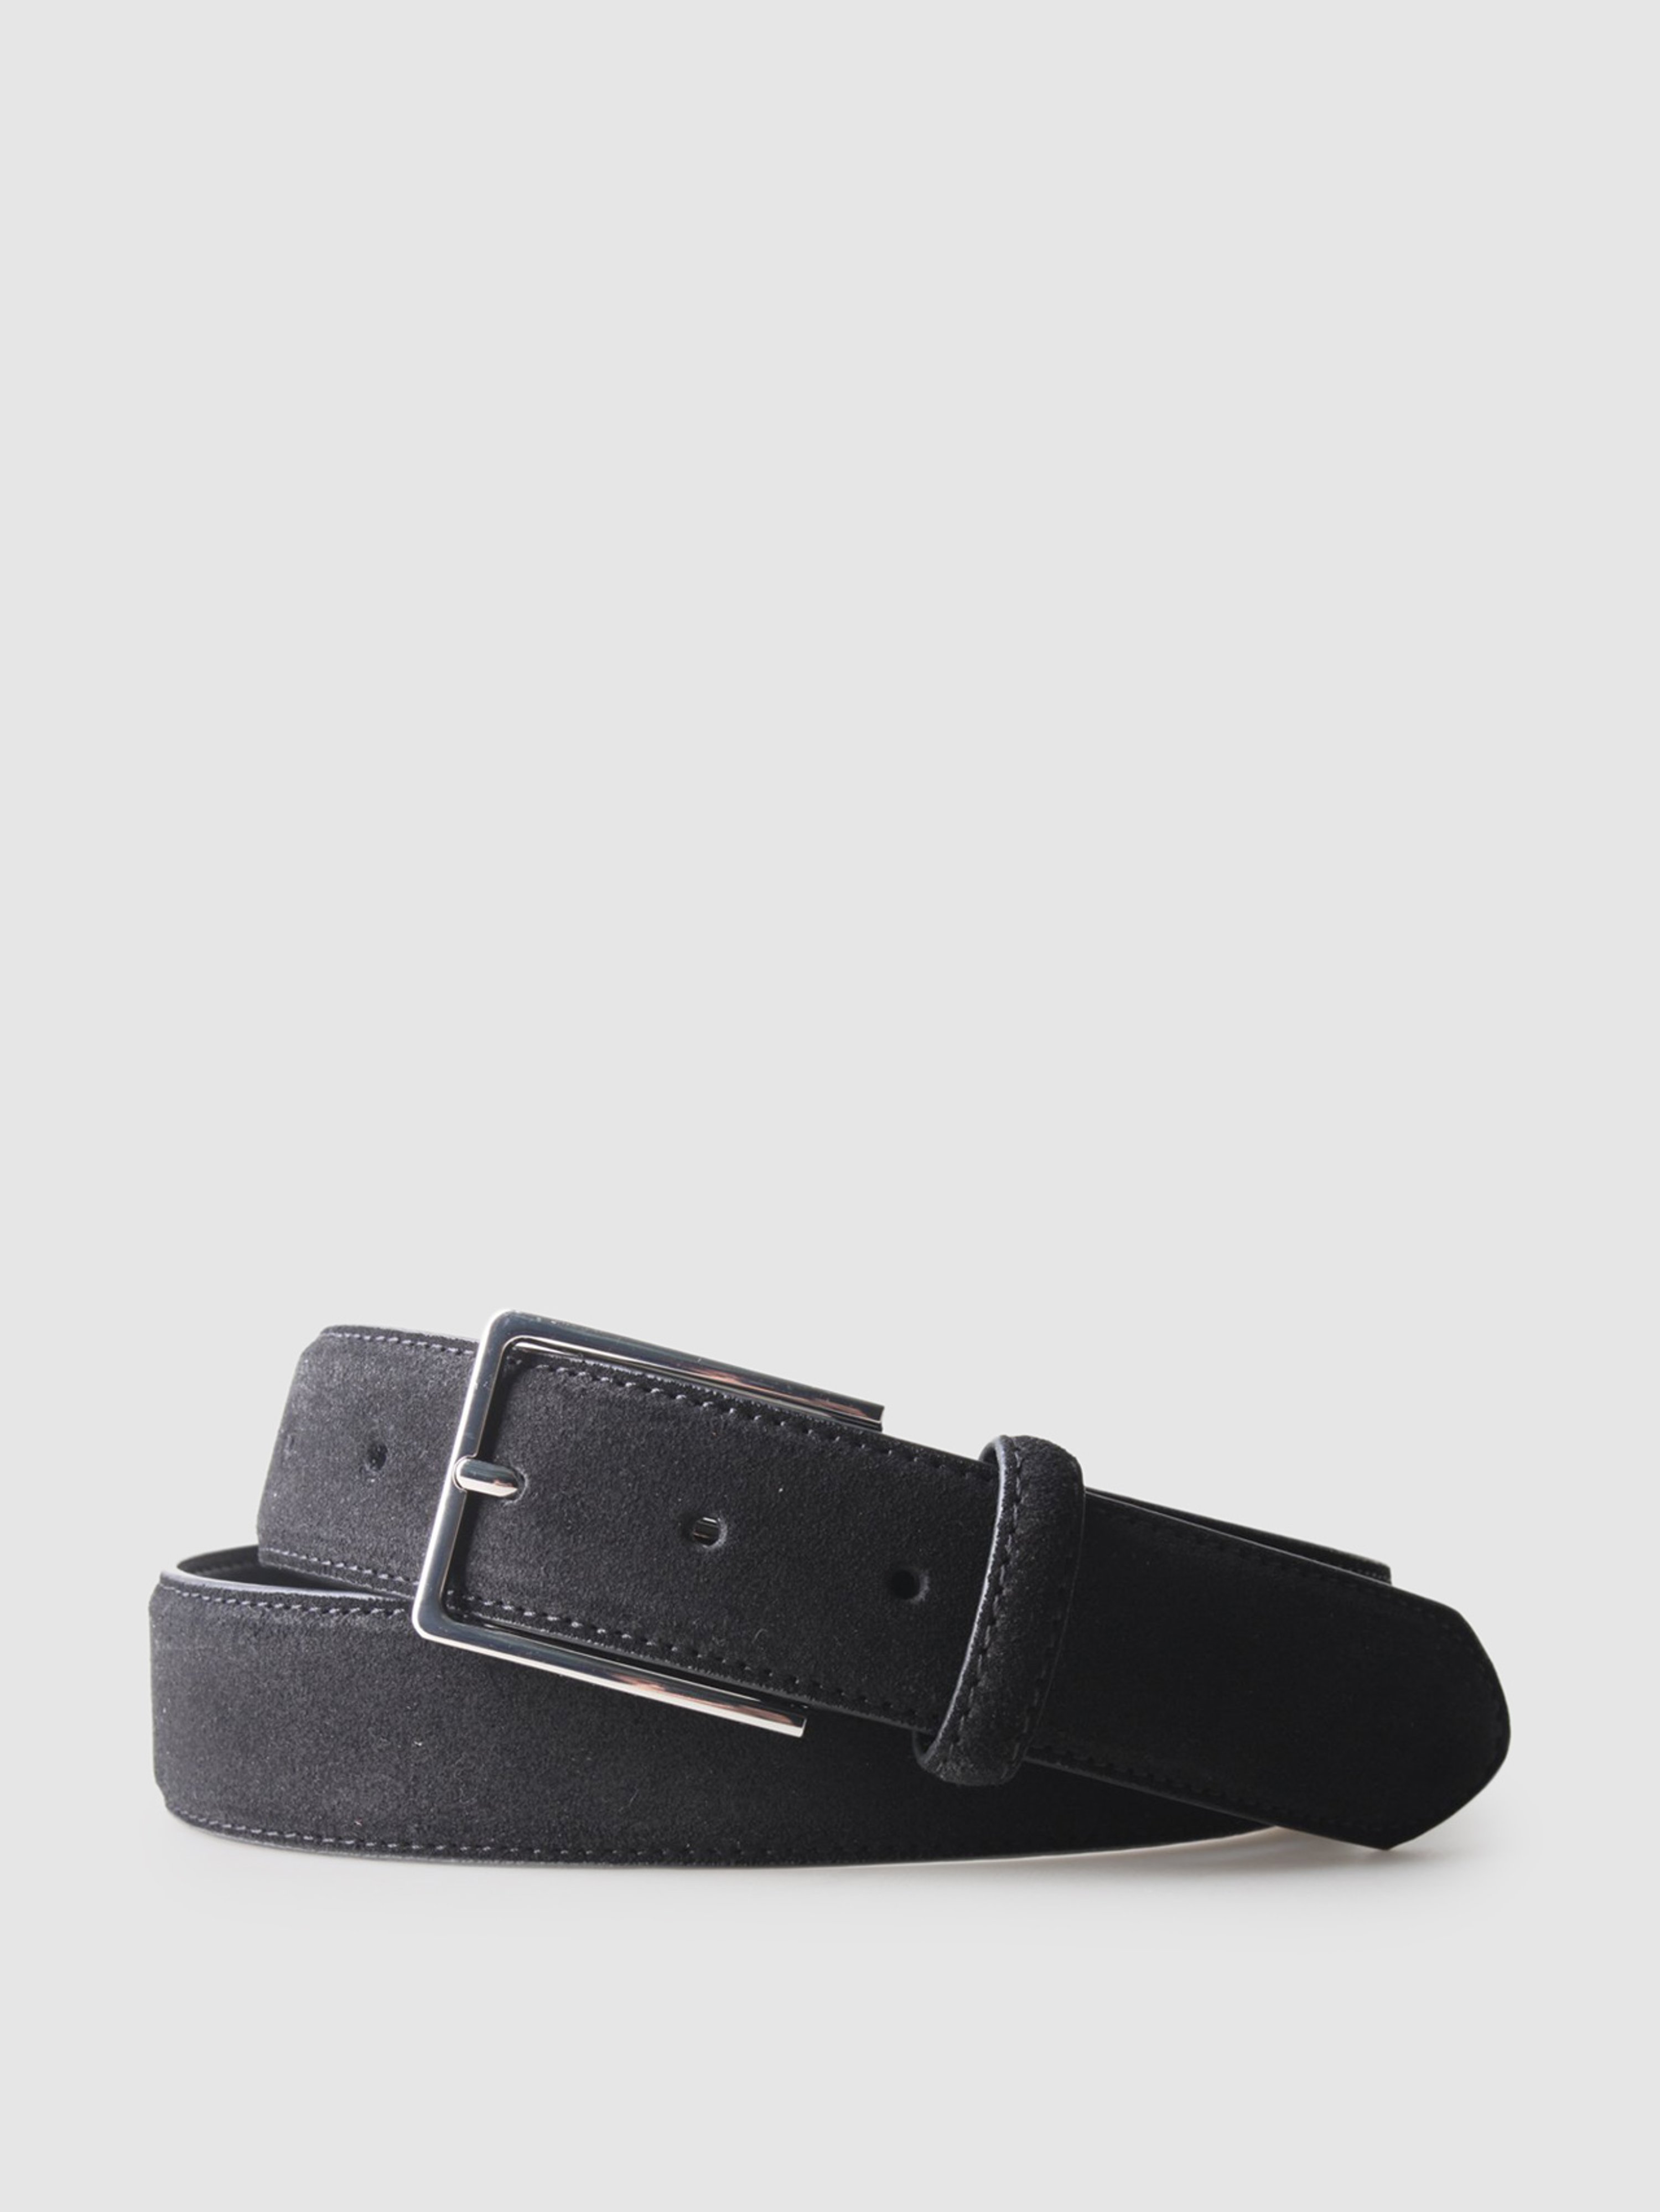 PX PX REMY SUEDE LEATHER 3.5 CM BELT